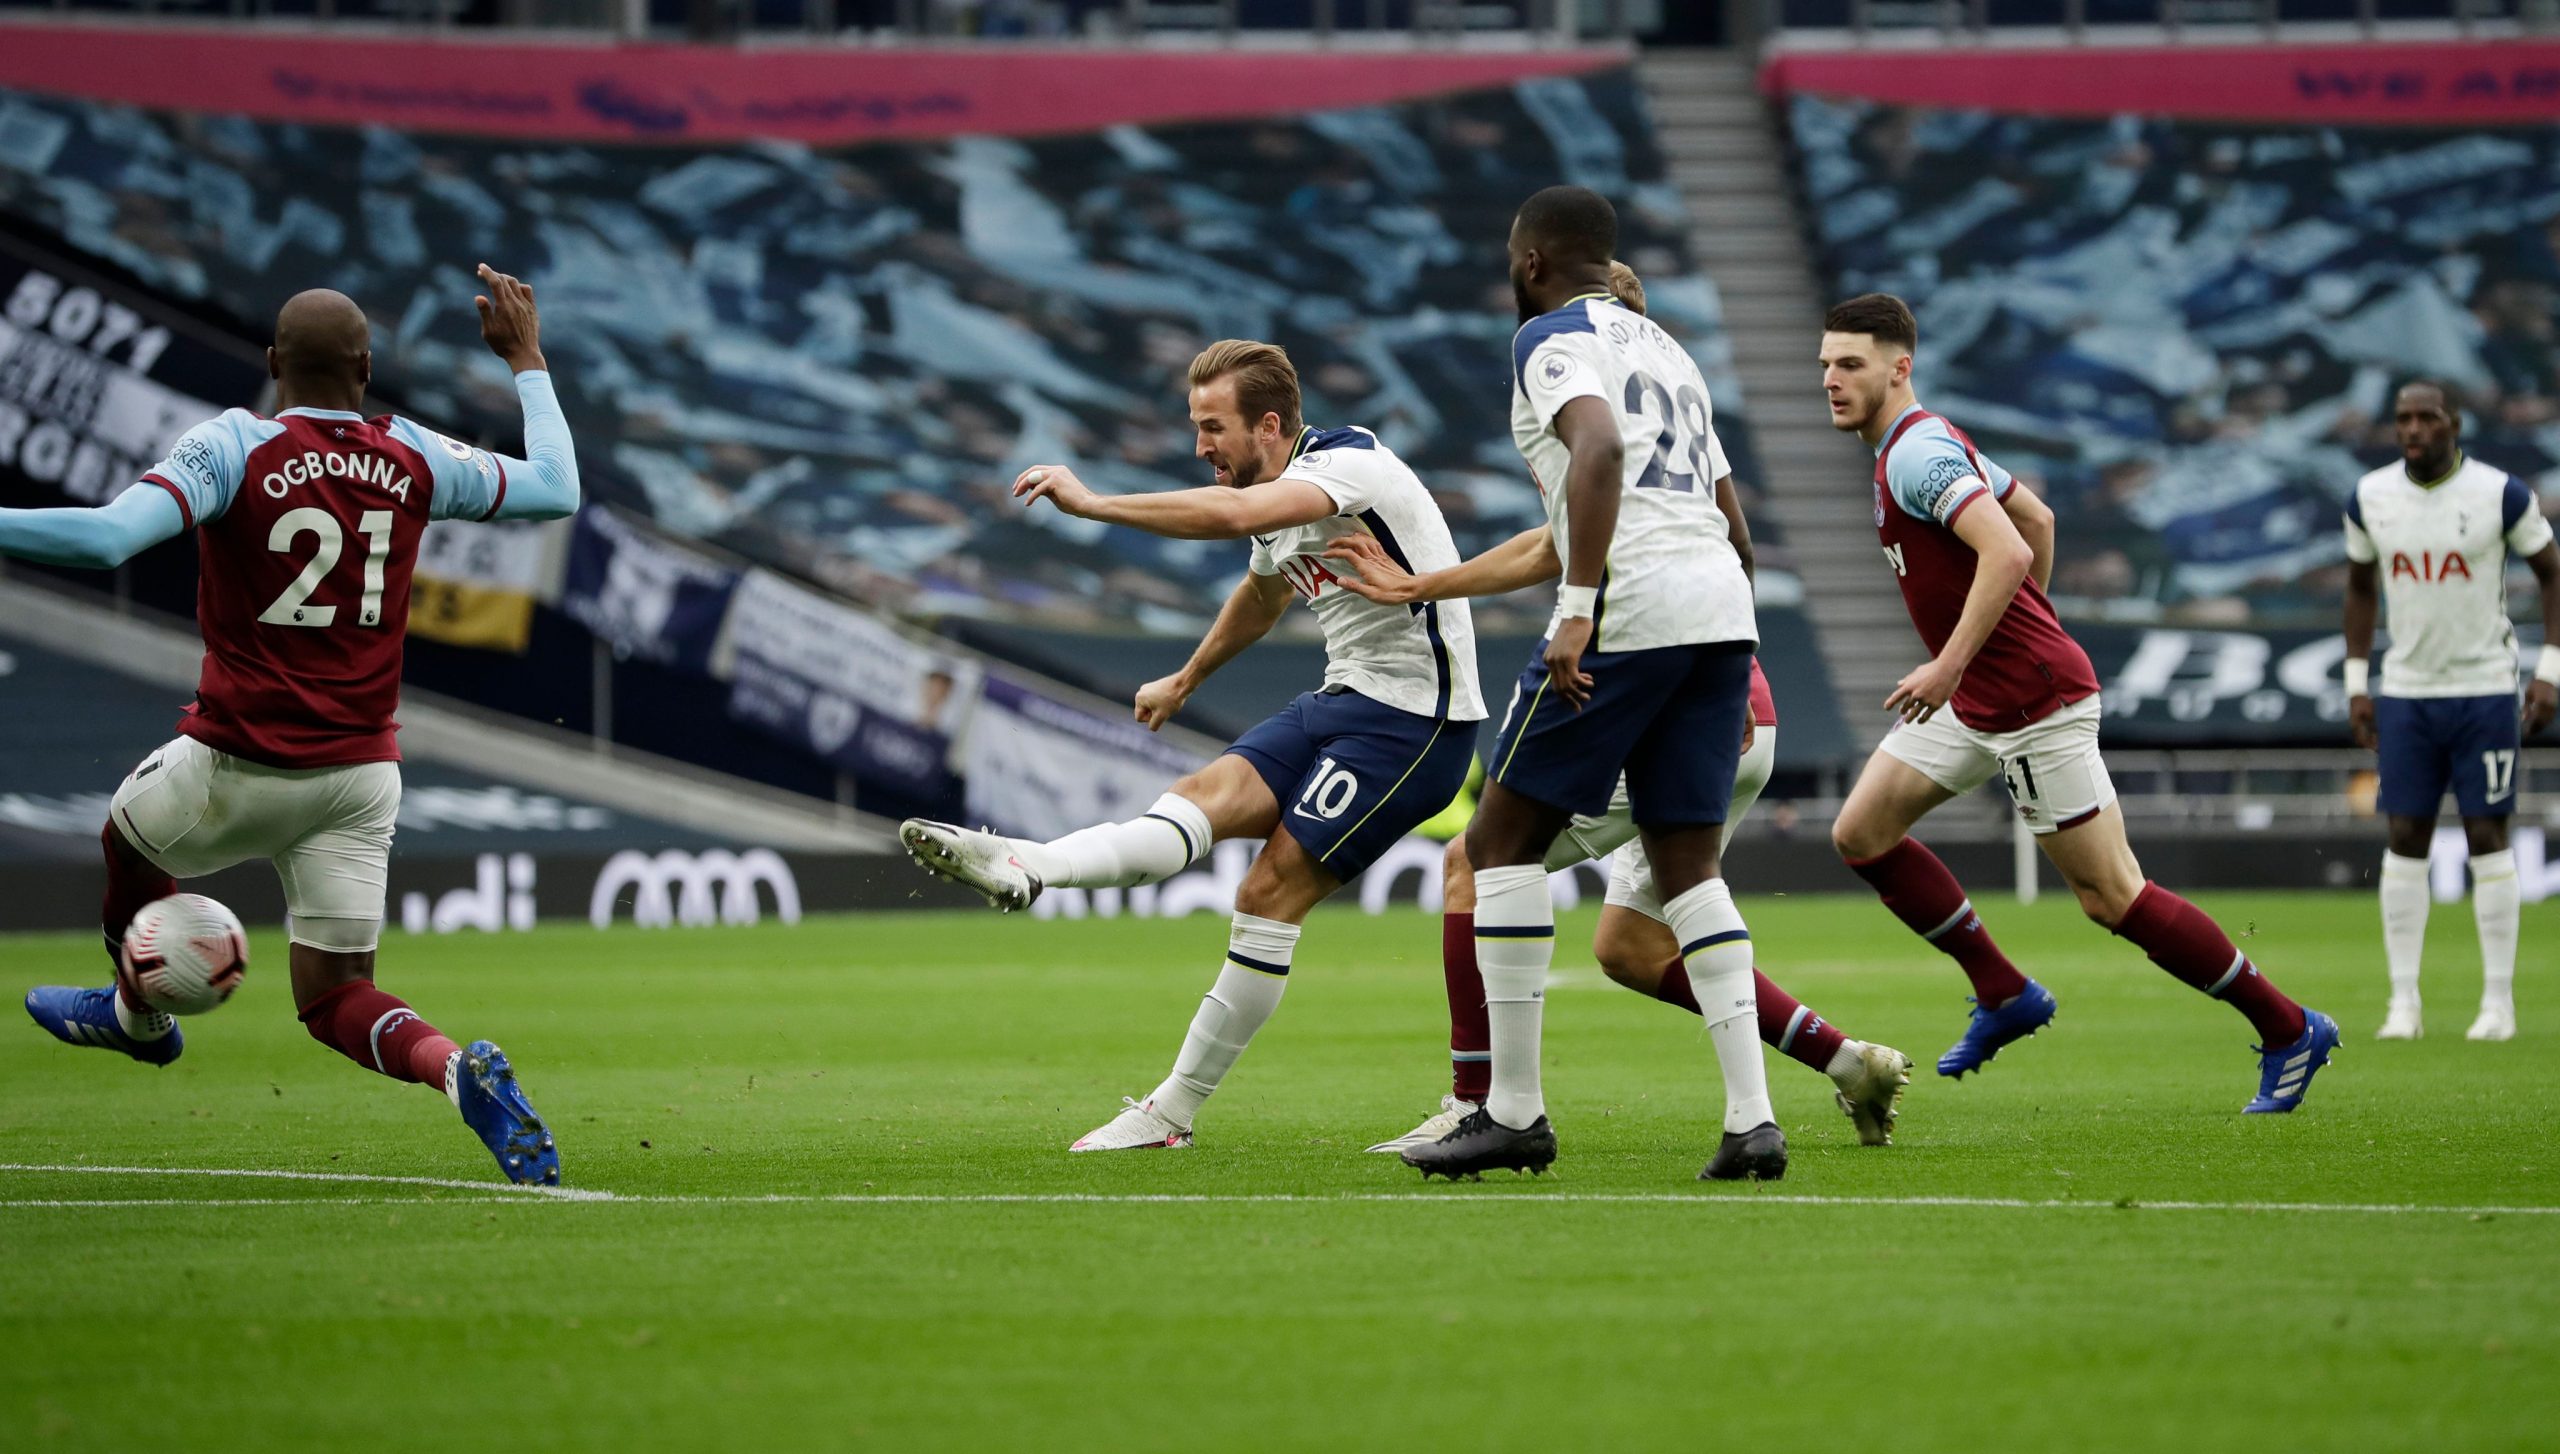 Harry Kane and SOn Heung-Min have been impressive for Tottenham Hotspur